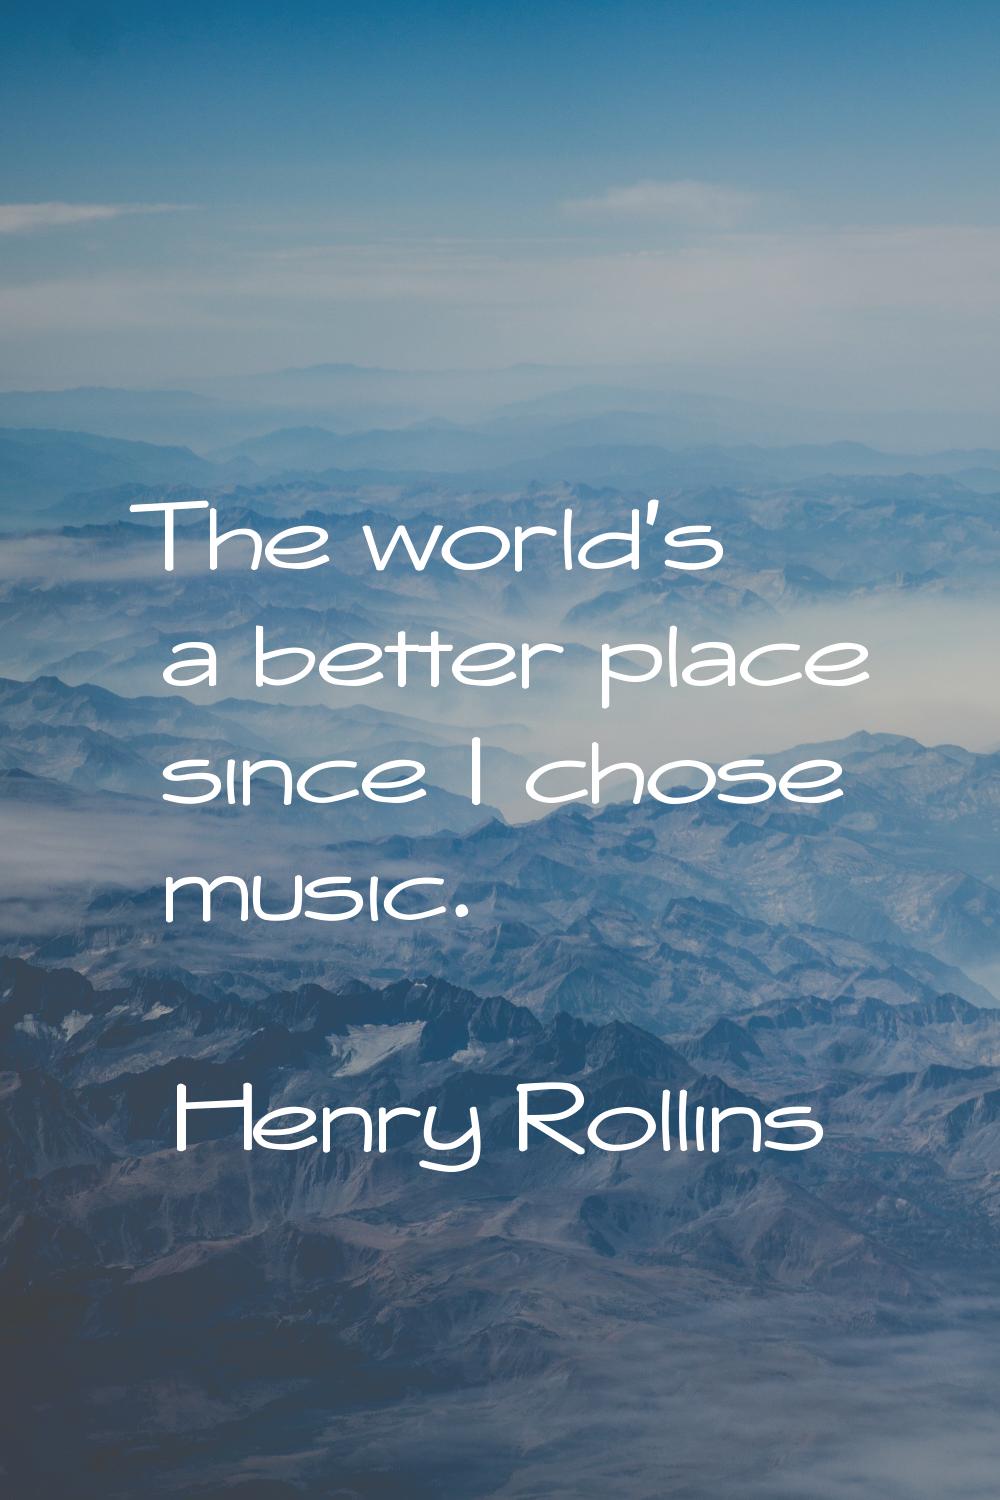 The world's a better place since I chose music.